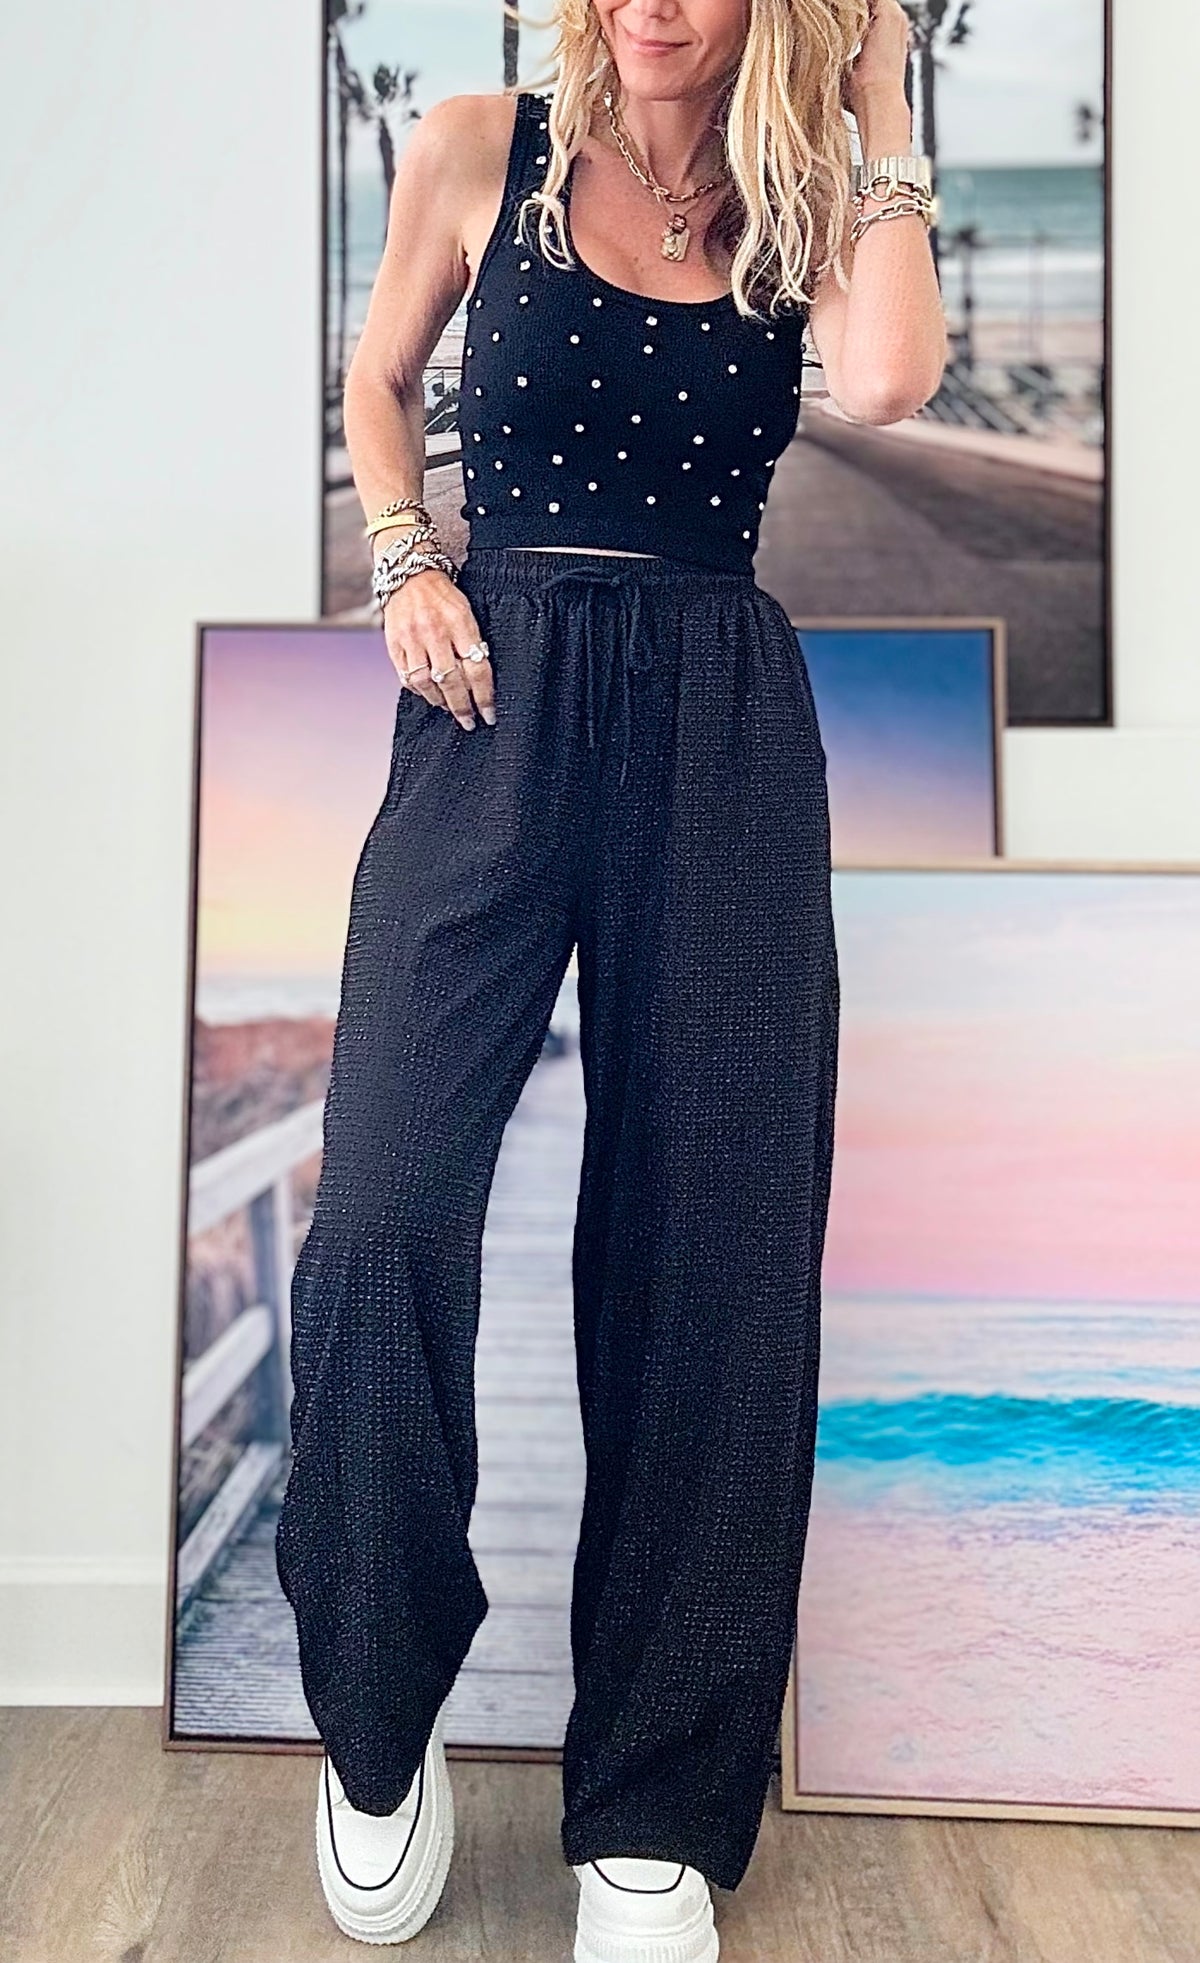 Sparkling Elastic Waist Pants-170 Bottoms-Galita-Coastal Bloom Boutique, find the trendiest versions of the popular styles and looks Located in Indialantic, FL